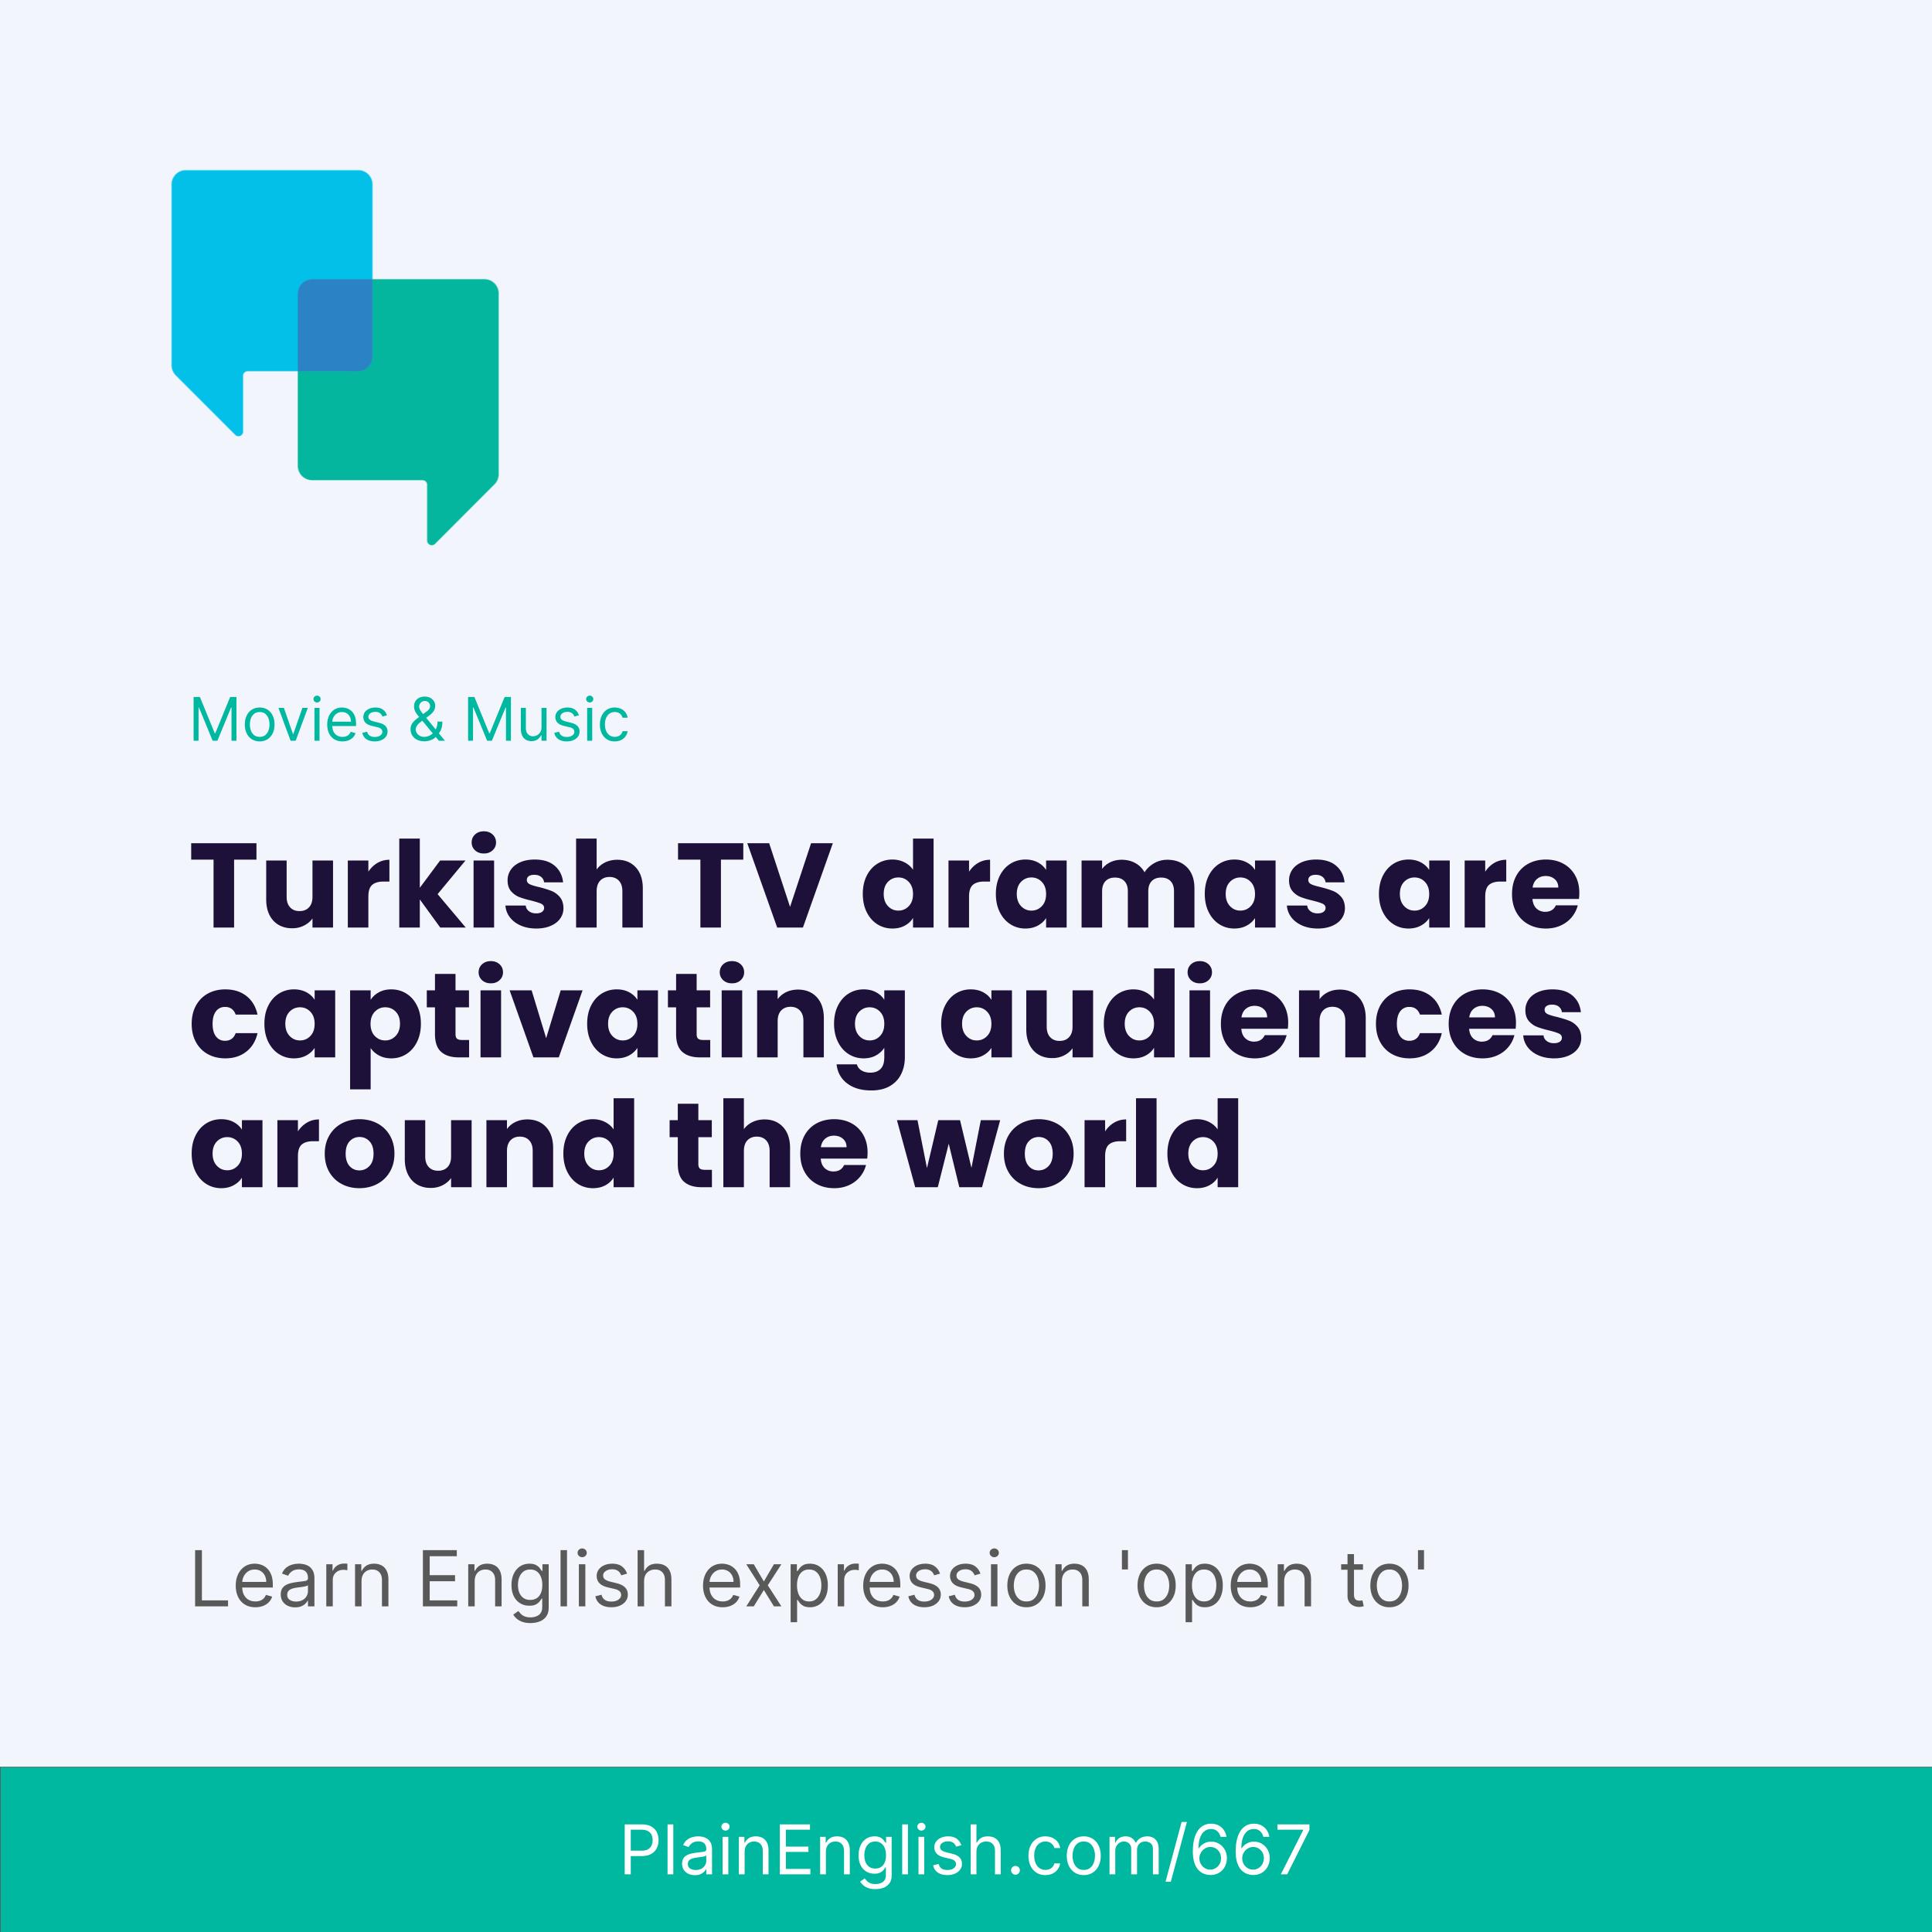 The growing popularity of Turkish television (Open to)